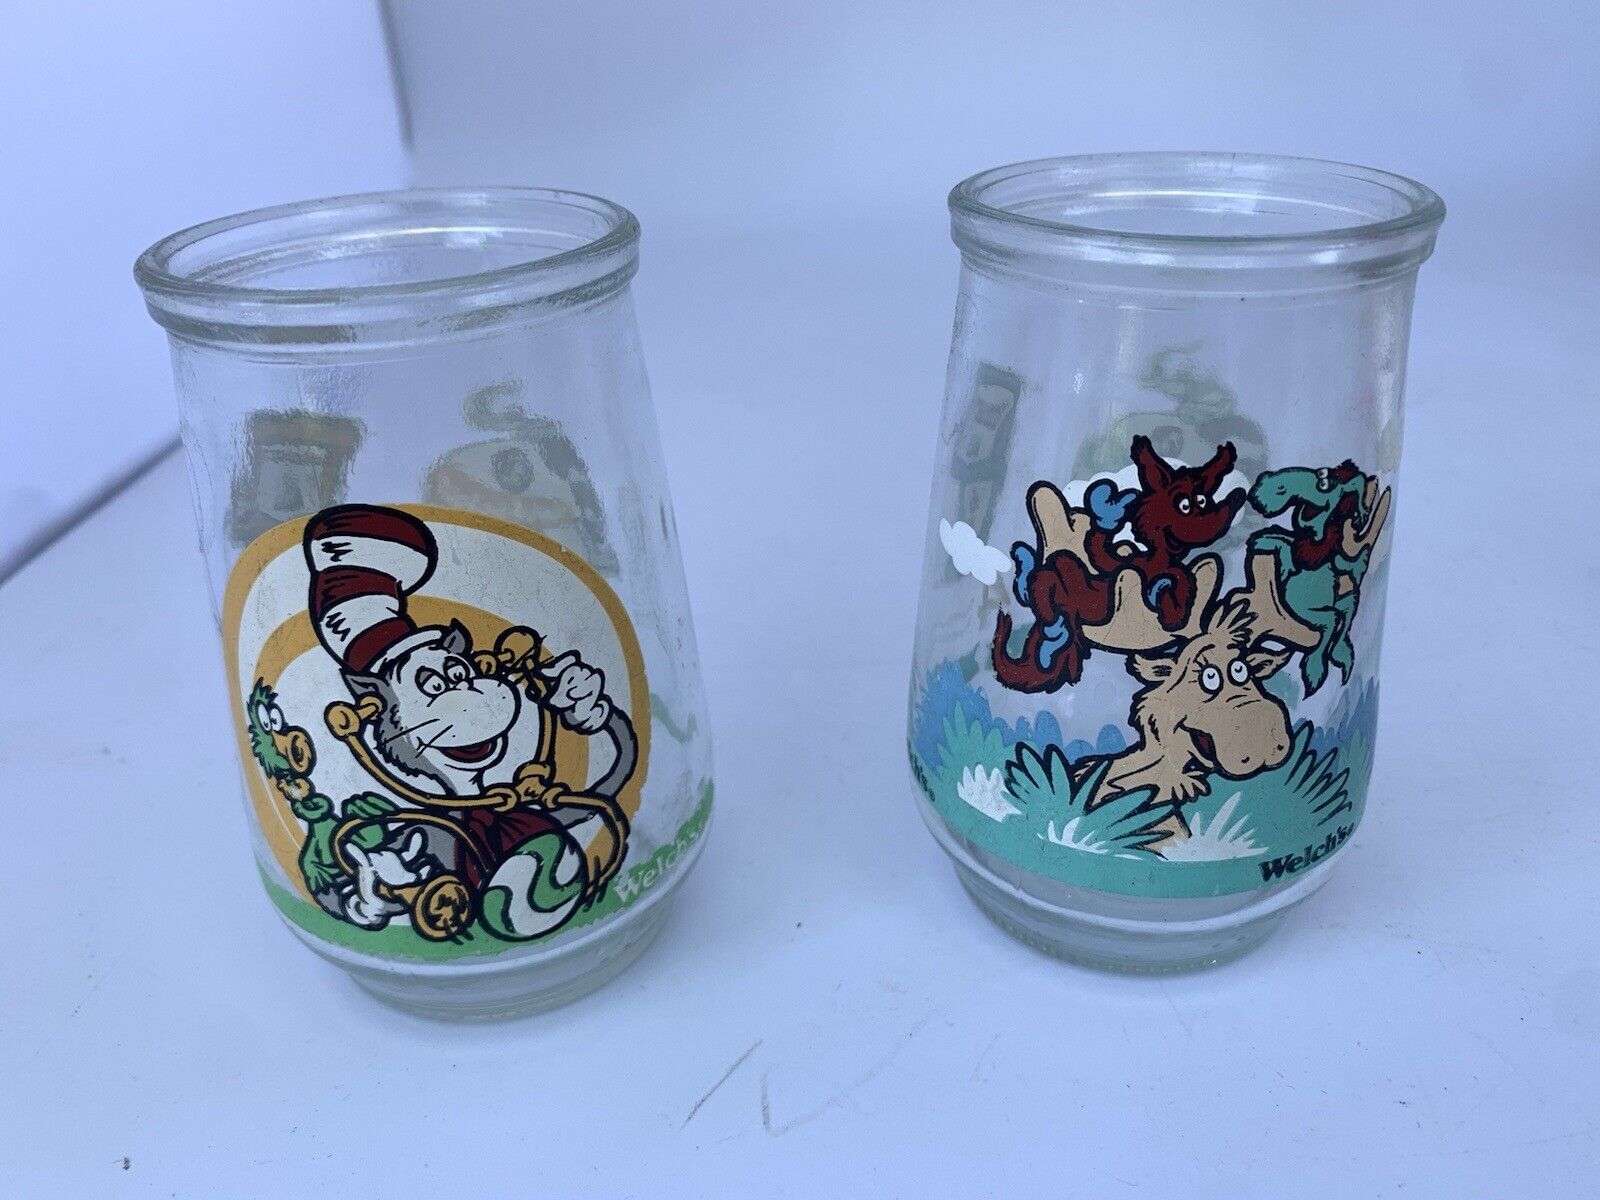 Vintage 1996 Lot of 2 Welch’s Jelly Jar Glasses Dr. Seuss #1 & #4 Cat in the Hat